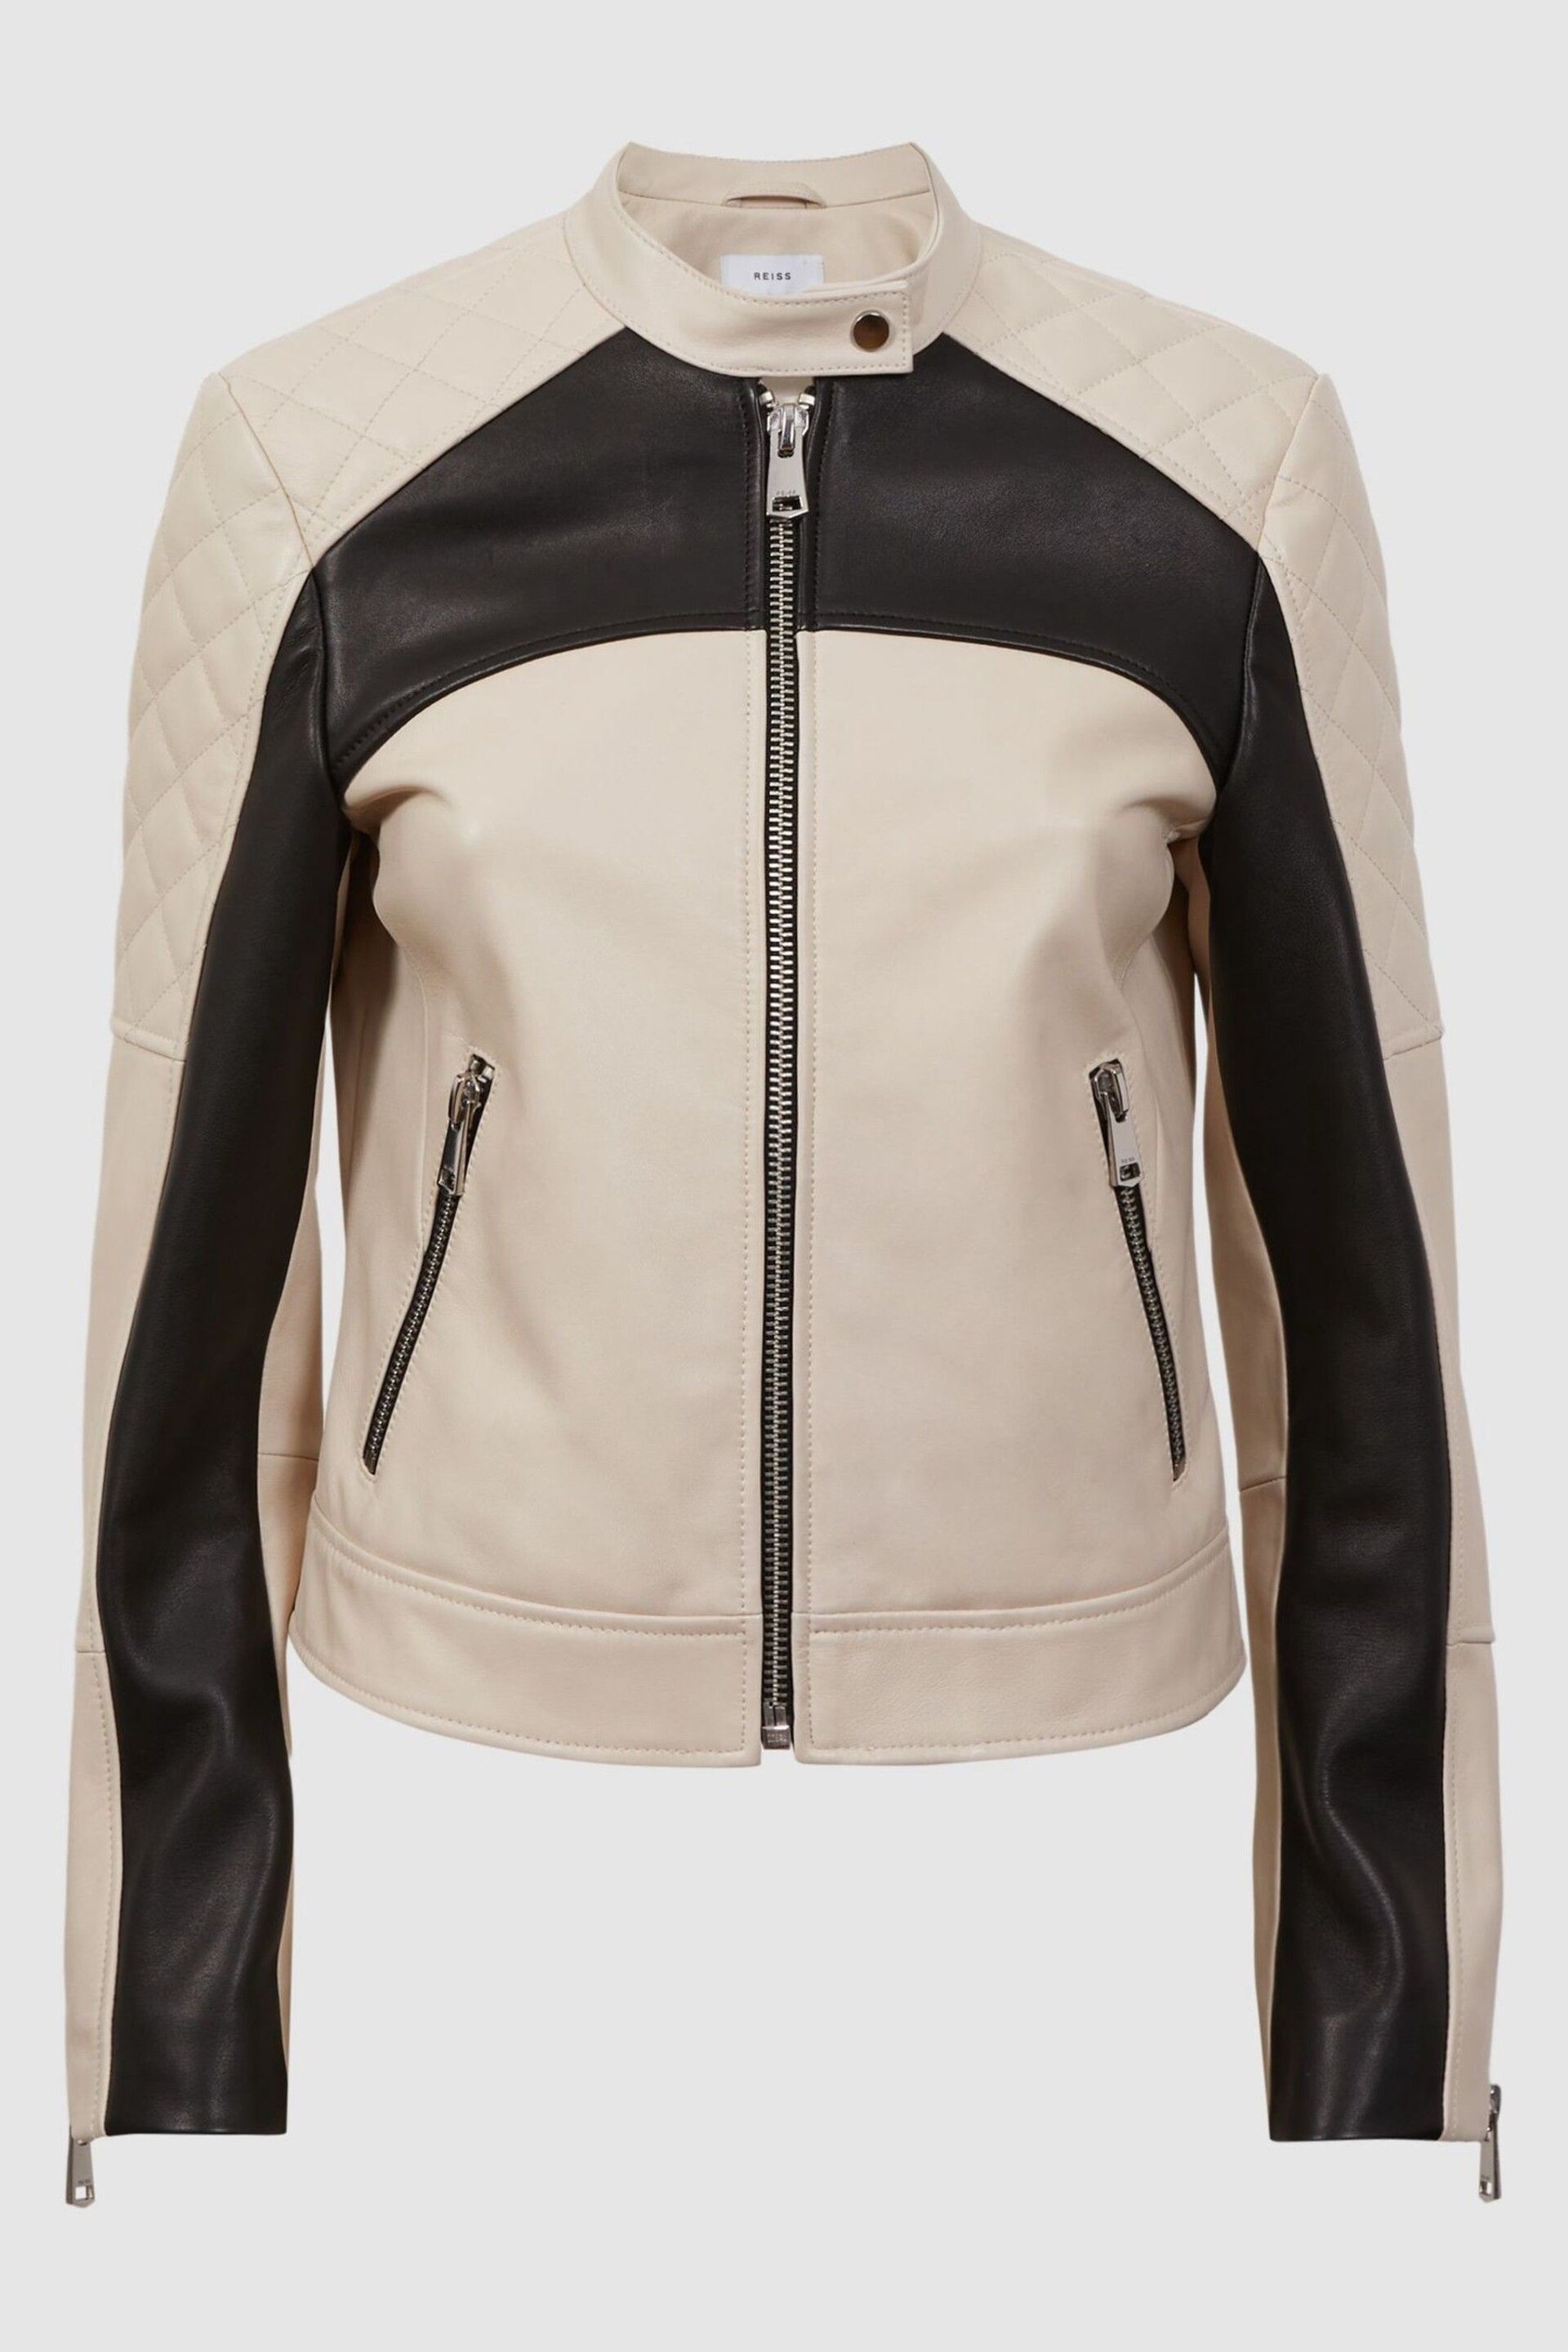 Reiss Black/Neutral Adelaide Leather Collarless Quilted Jacket - Image 2 of 5